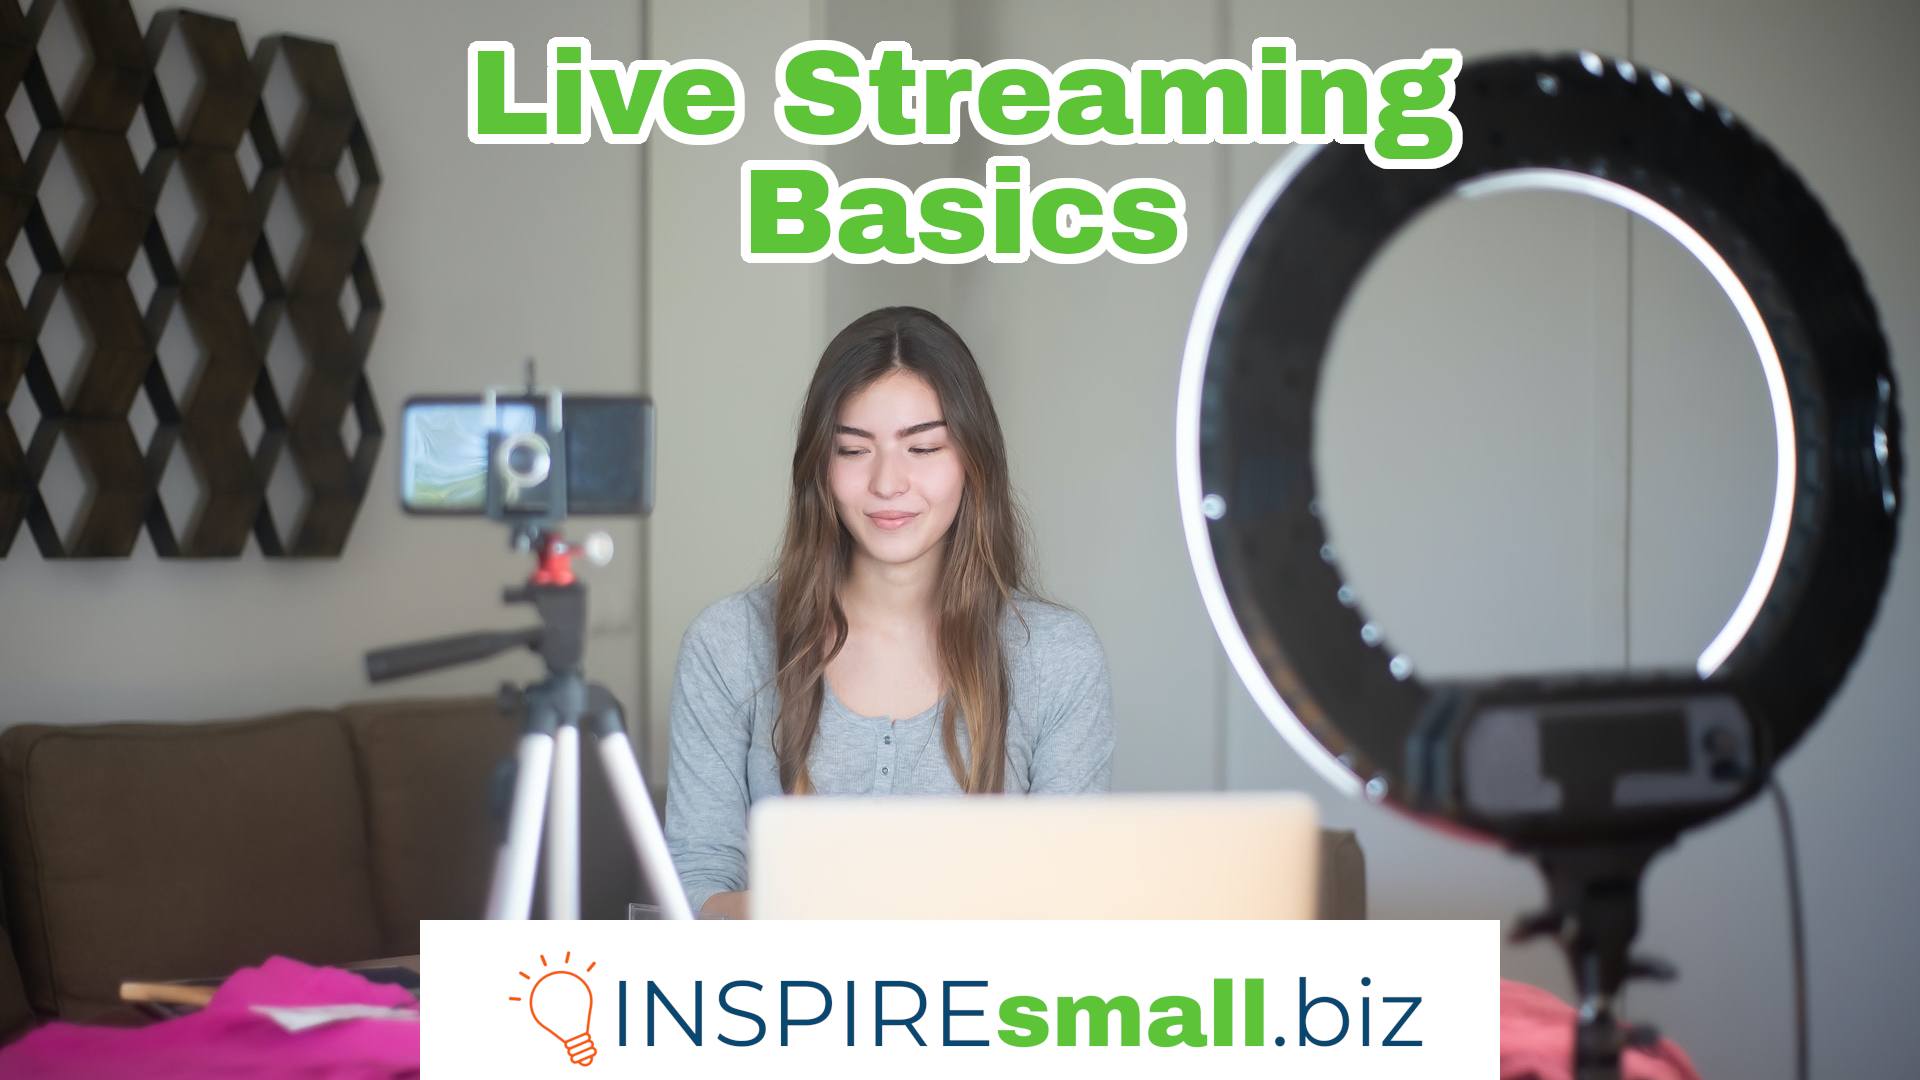 Live Streaming Basics Workshop – Week of March 13, 2023 Events